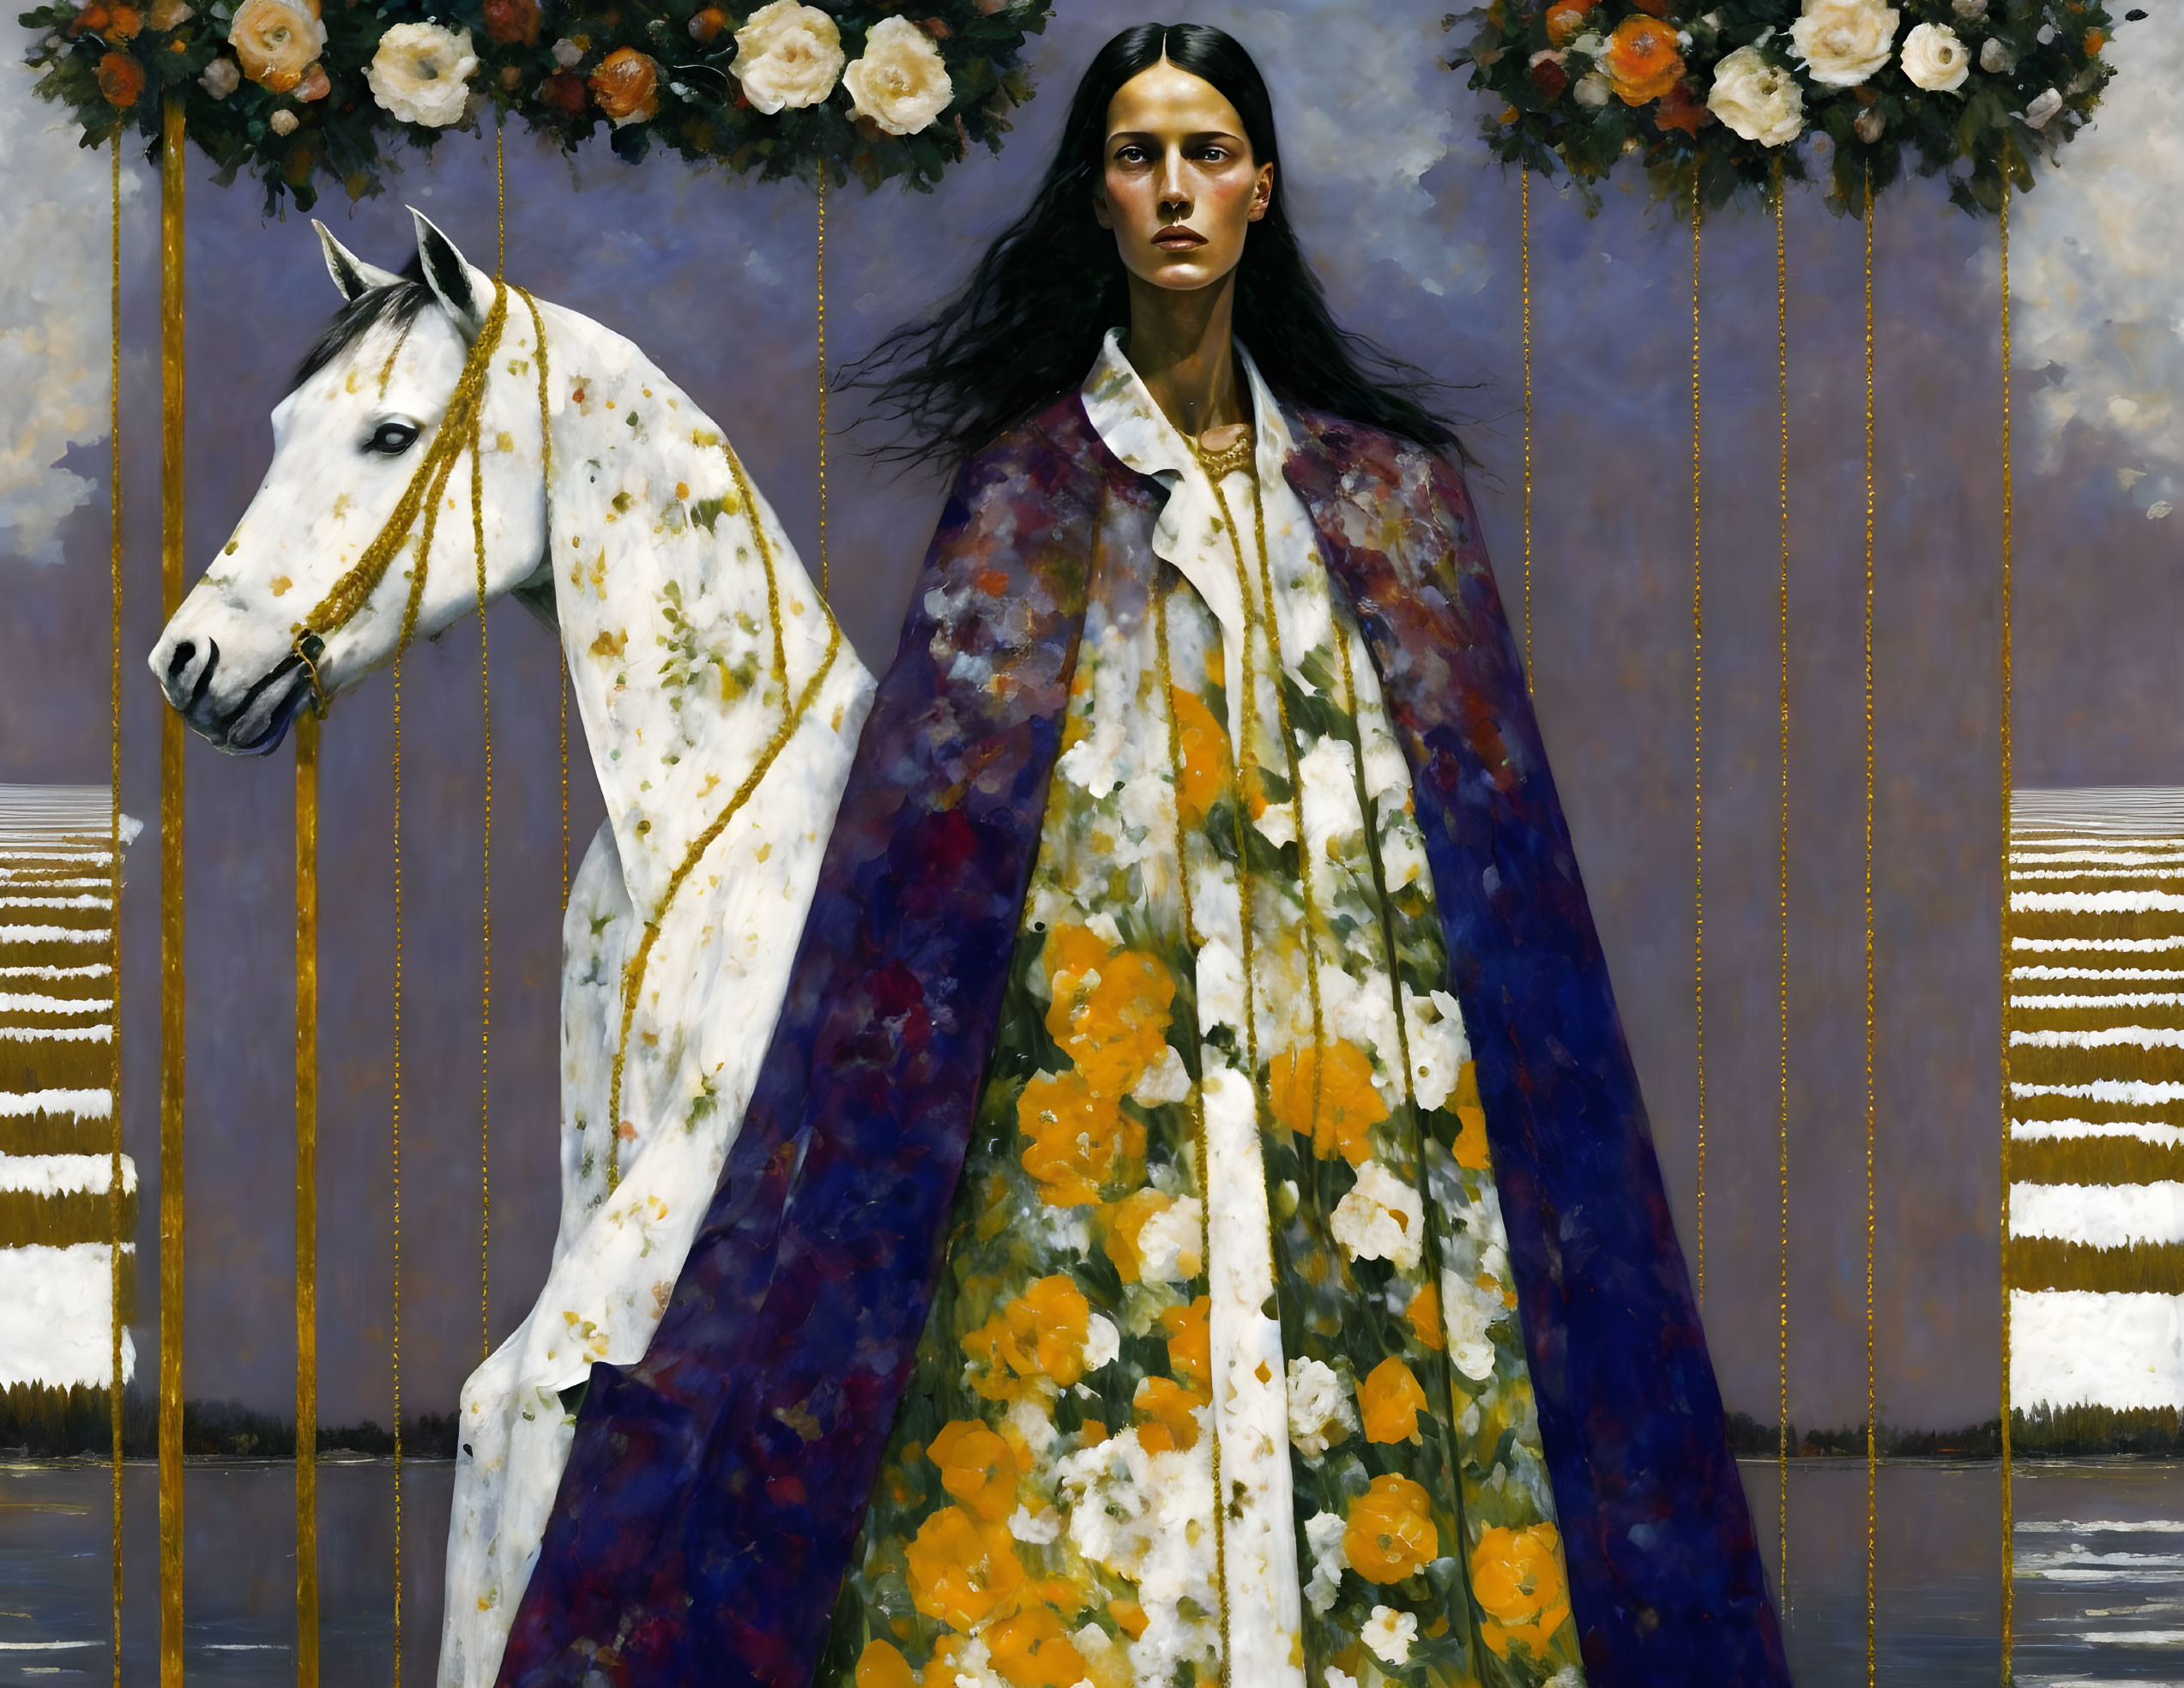 Woman with Dark Hair Beside White Horse in Floral Setting